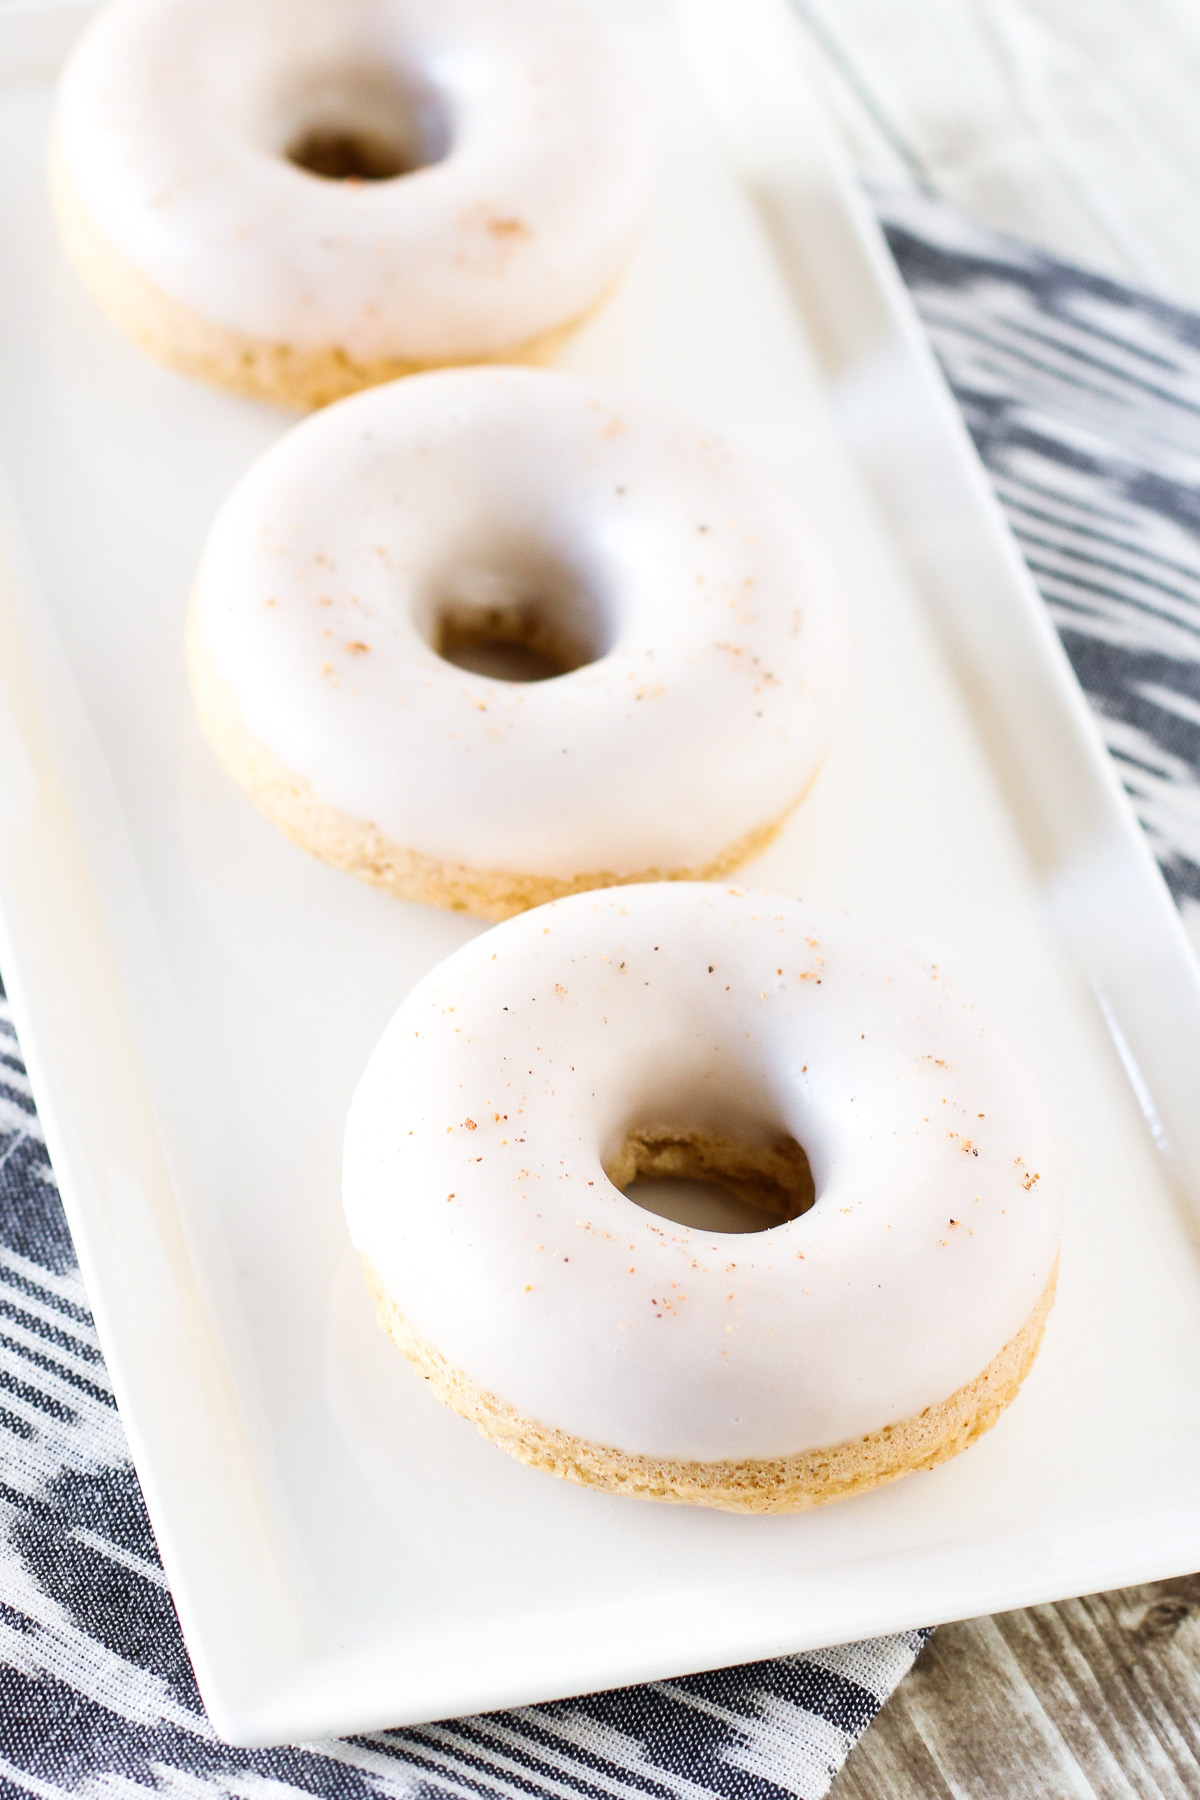 Gluten Free Vegan Baked Eggnog Donuts. Holiday flavor of creamy eggnog in these fluffy baked donuts.